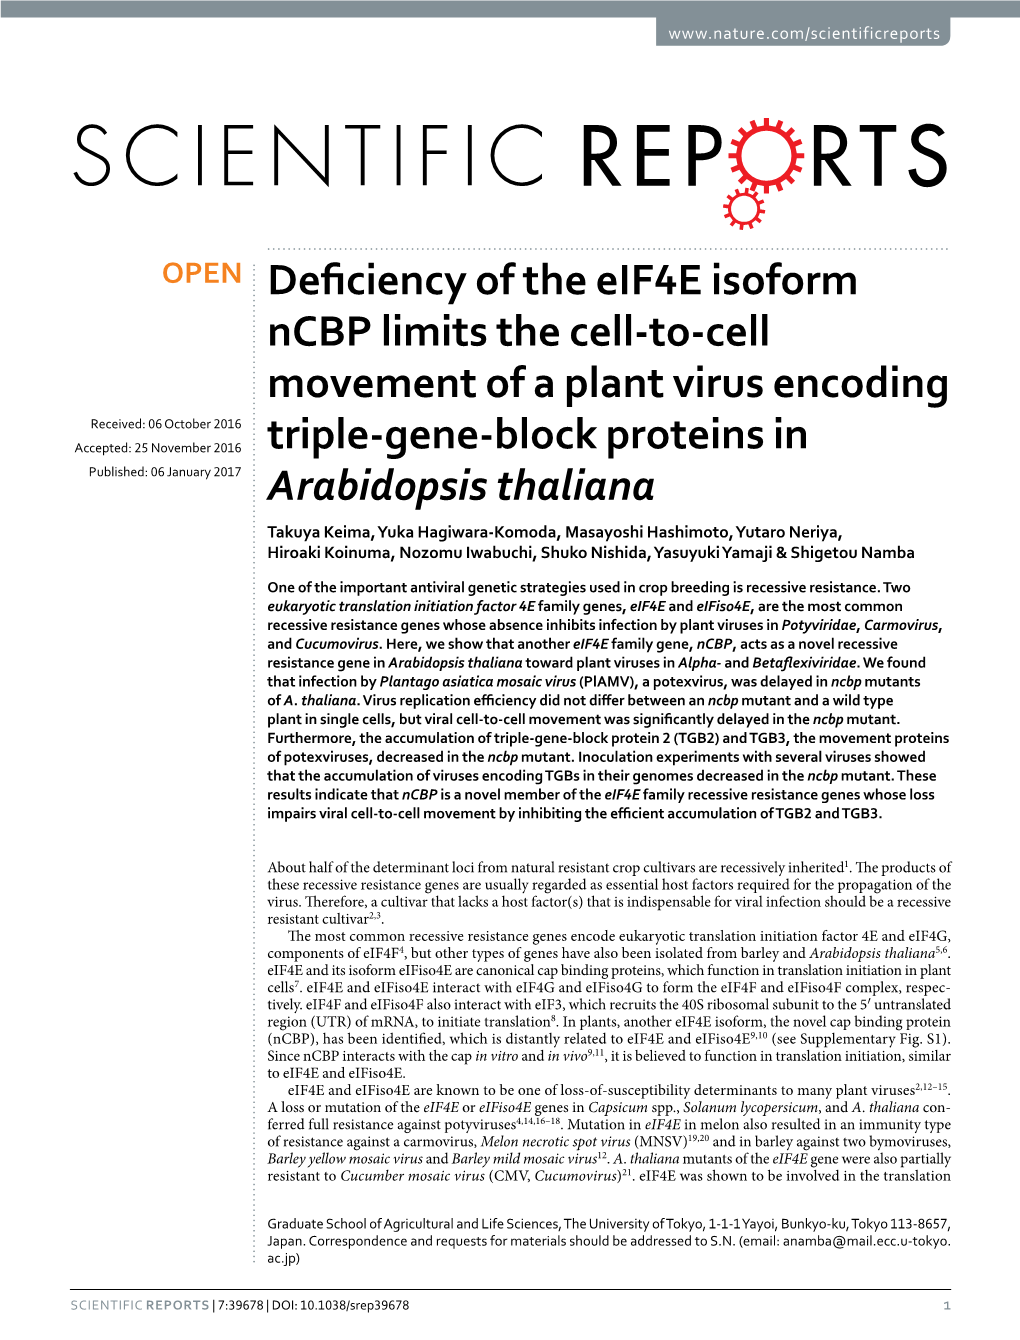 Deficiency of the Eif4e Isoform Ncbp Limits the Cell-To-Cell Movement of A